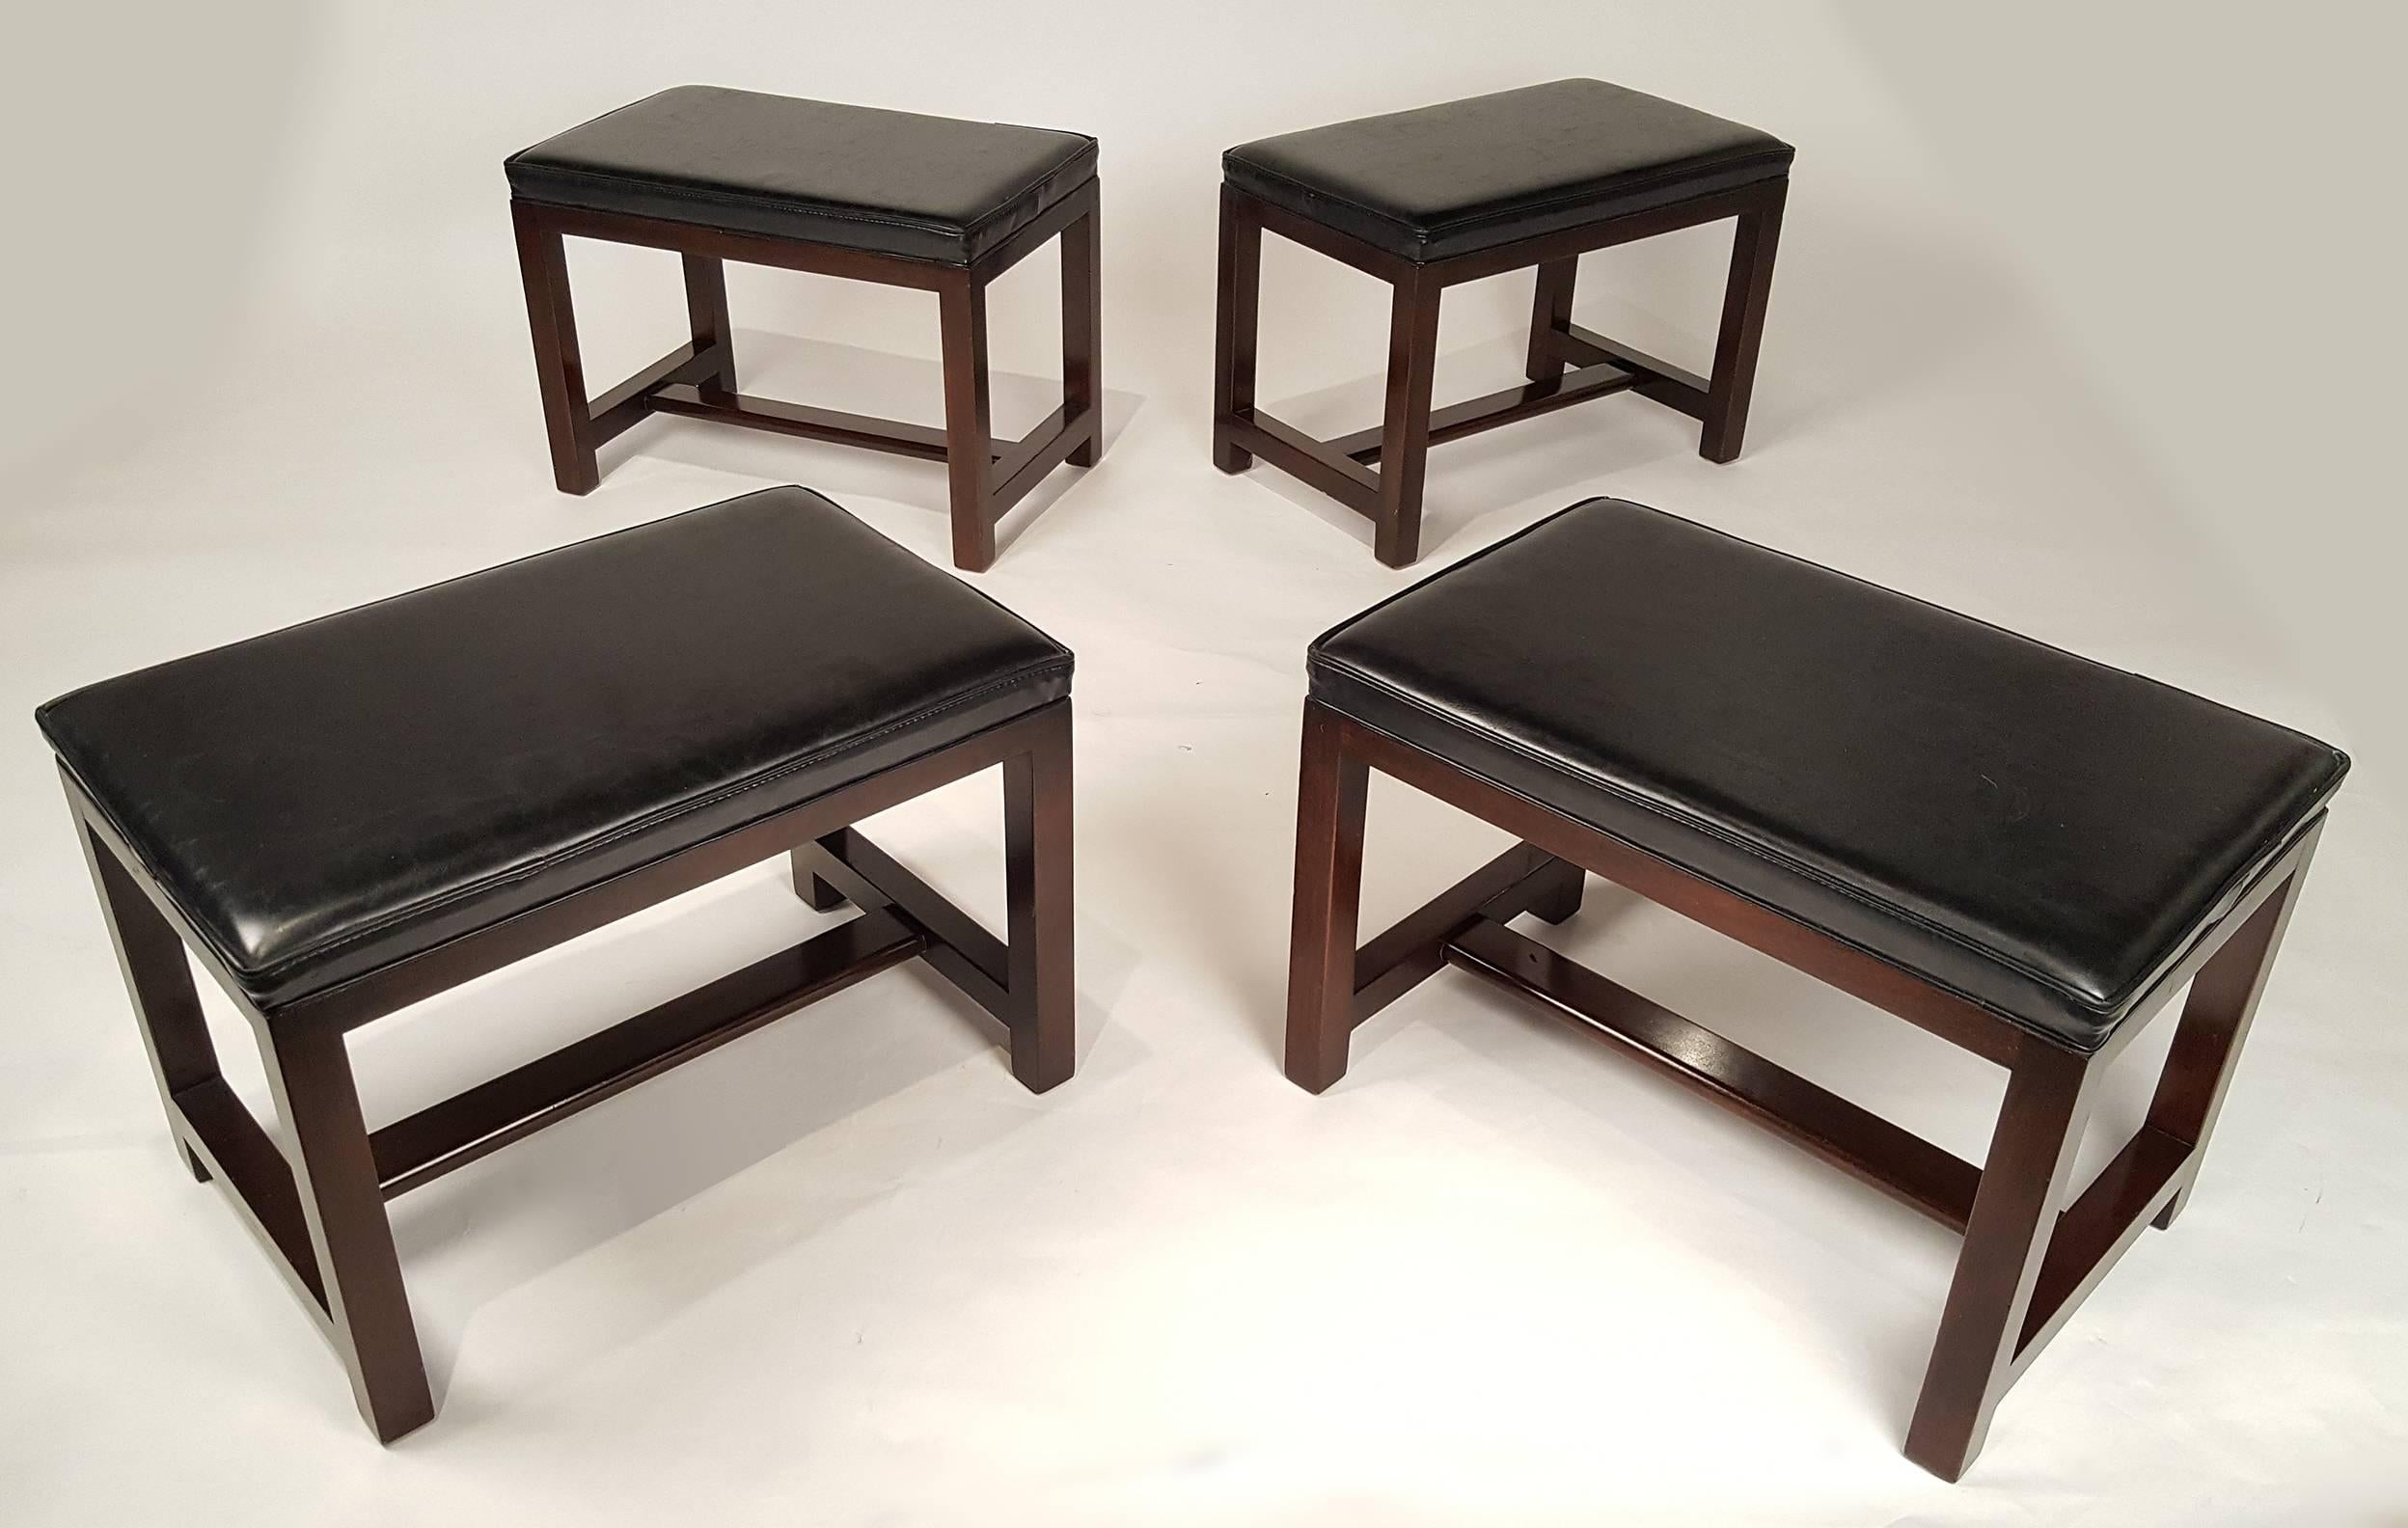 Two Pairs of Solid Mahogany Stools by Edward Wormley for Dunbar In Good Condition For Sale In Dallas, TX